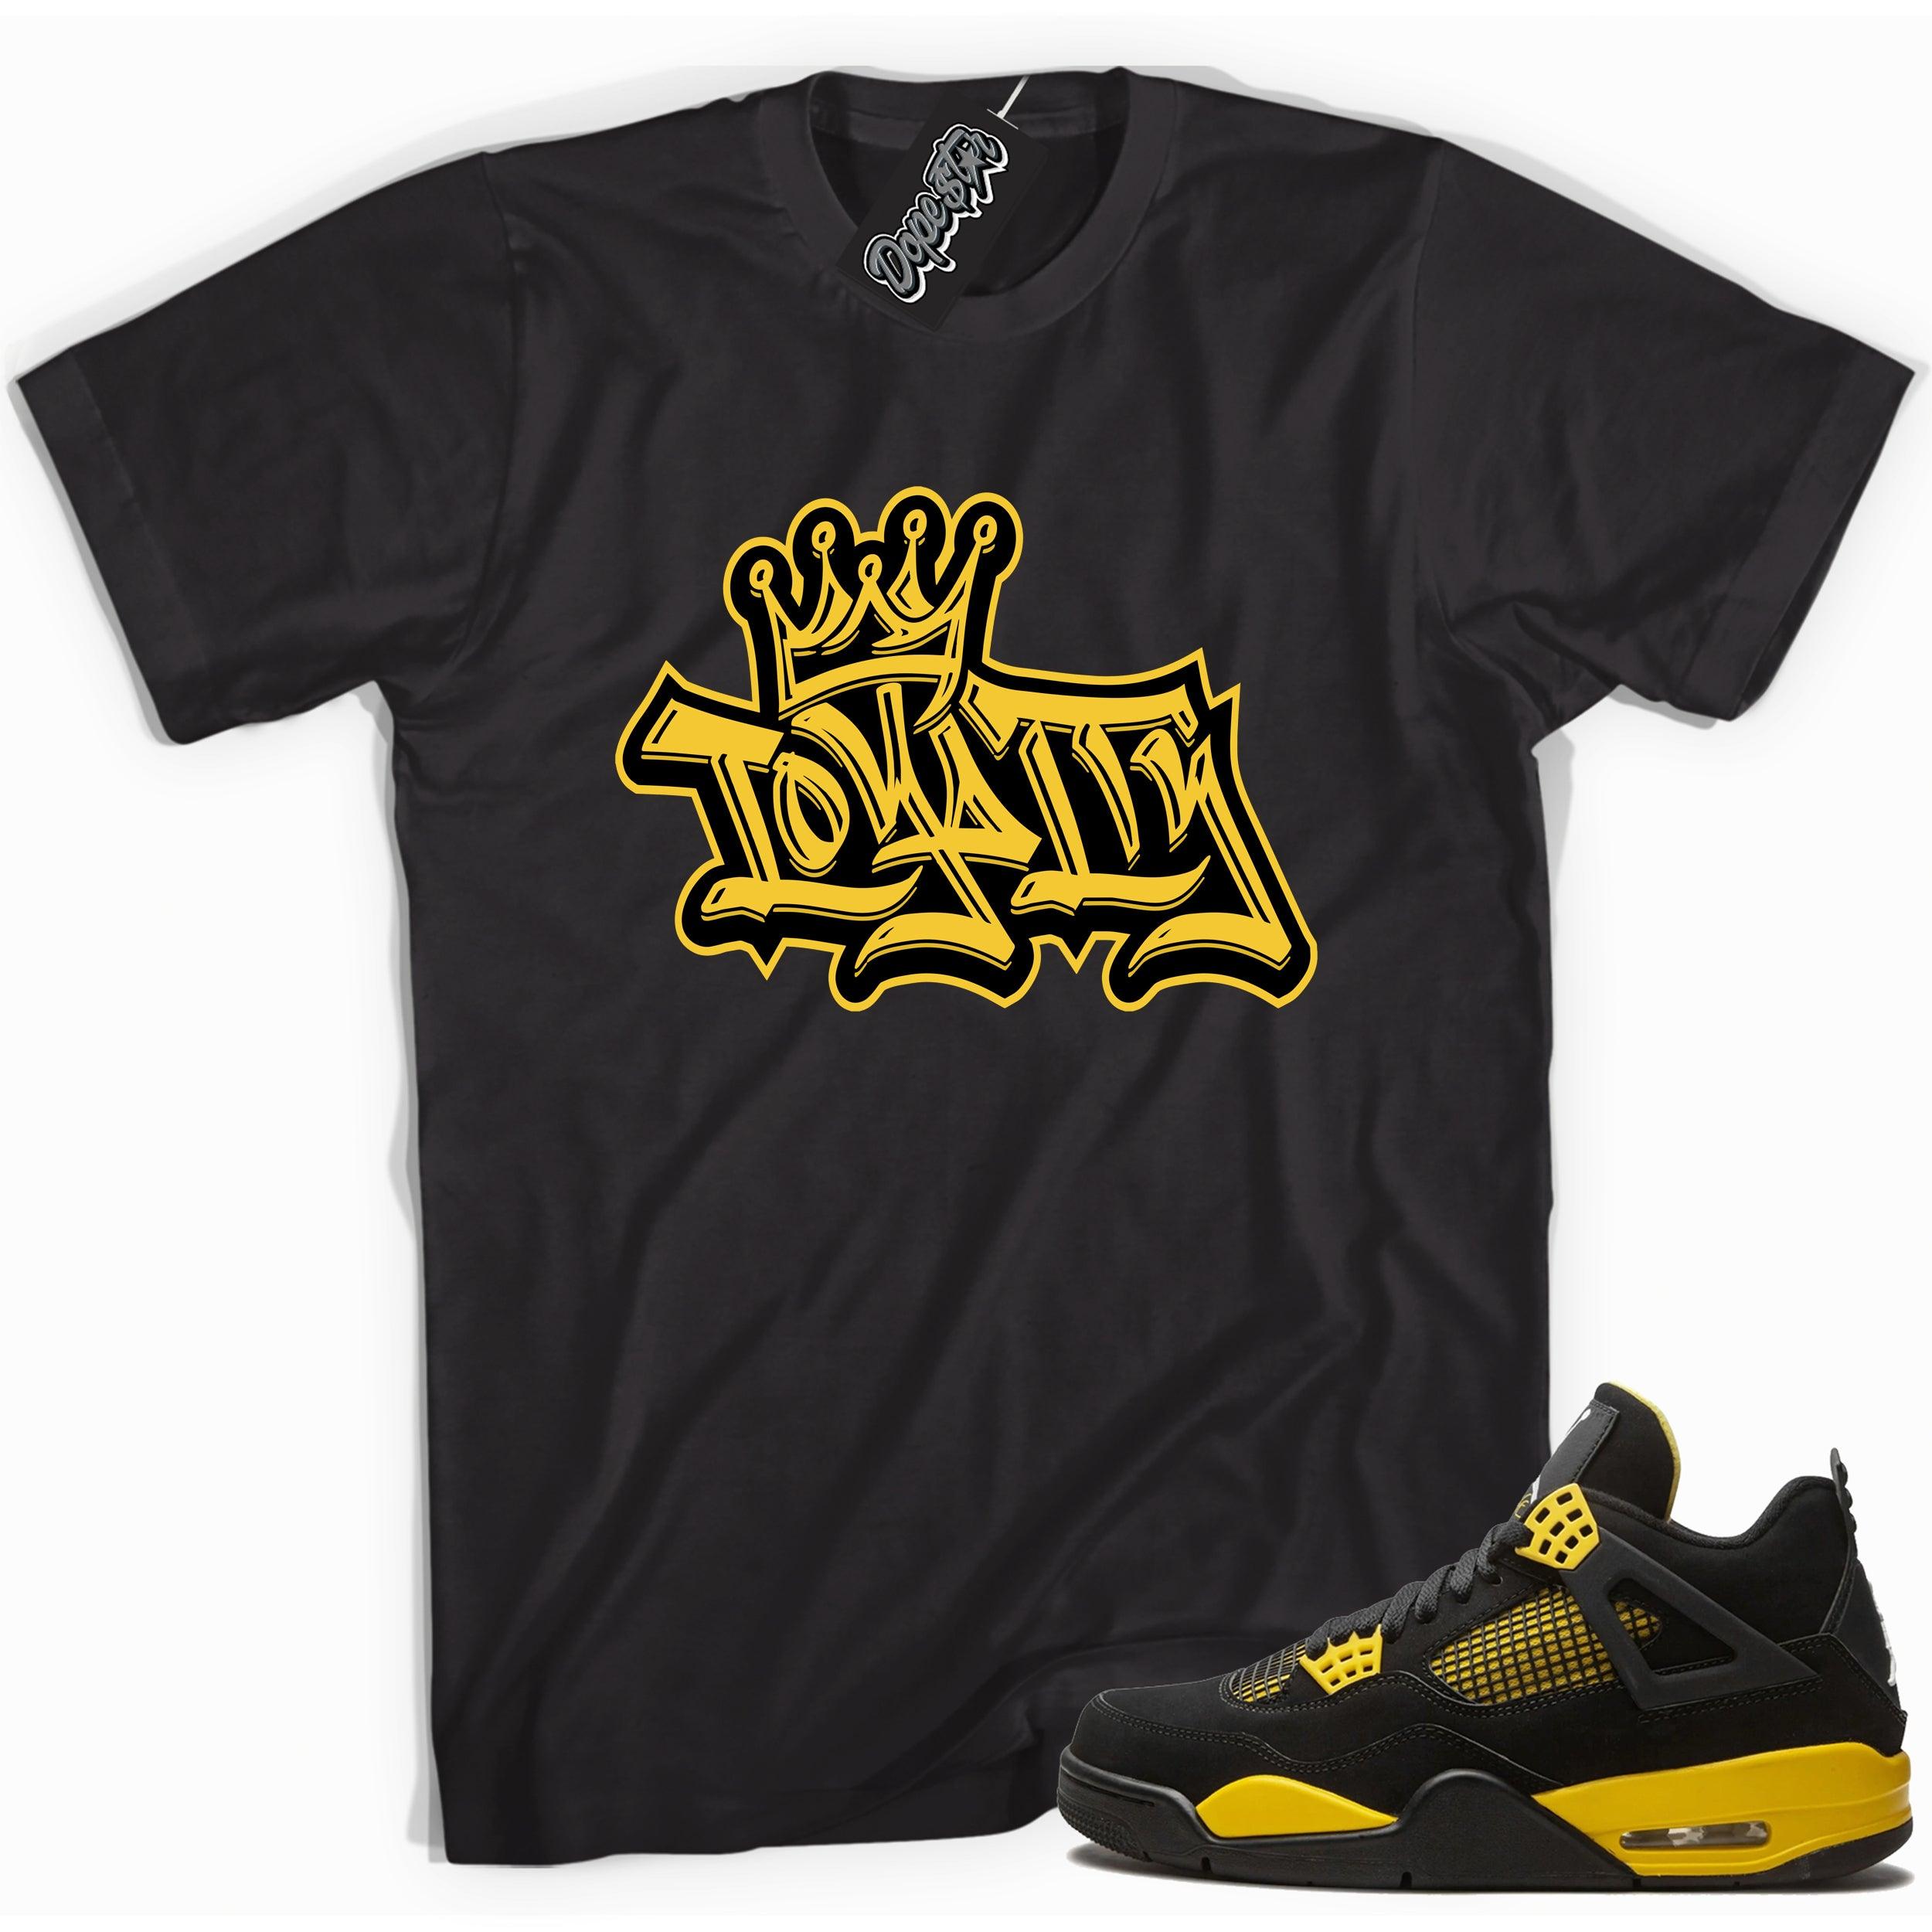 Cool black graphic tee with 'loyalty crown' print, that perfectly matches  Air Jordan 4 Thunder sneakers